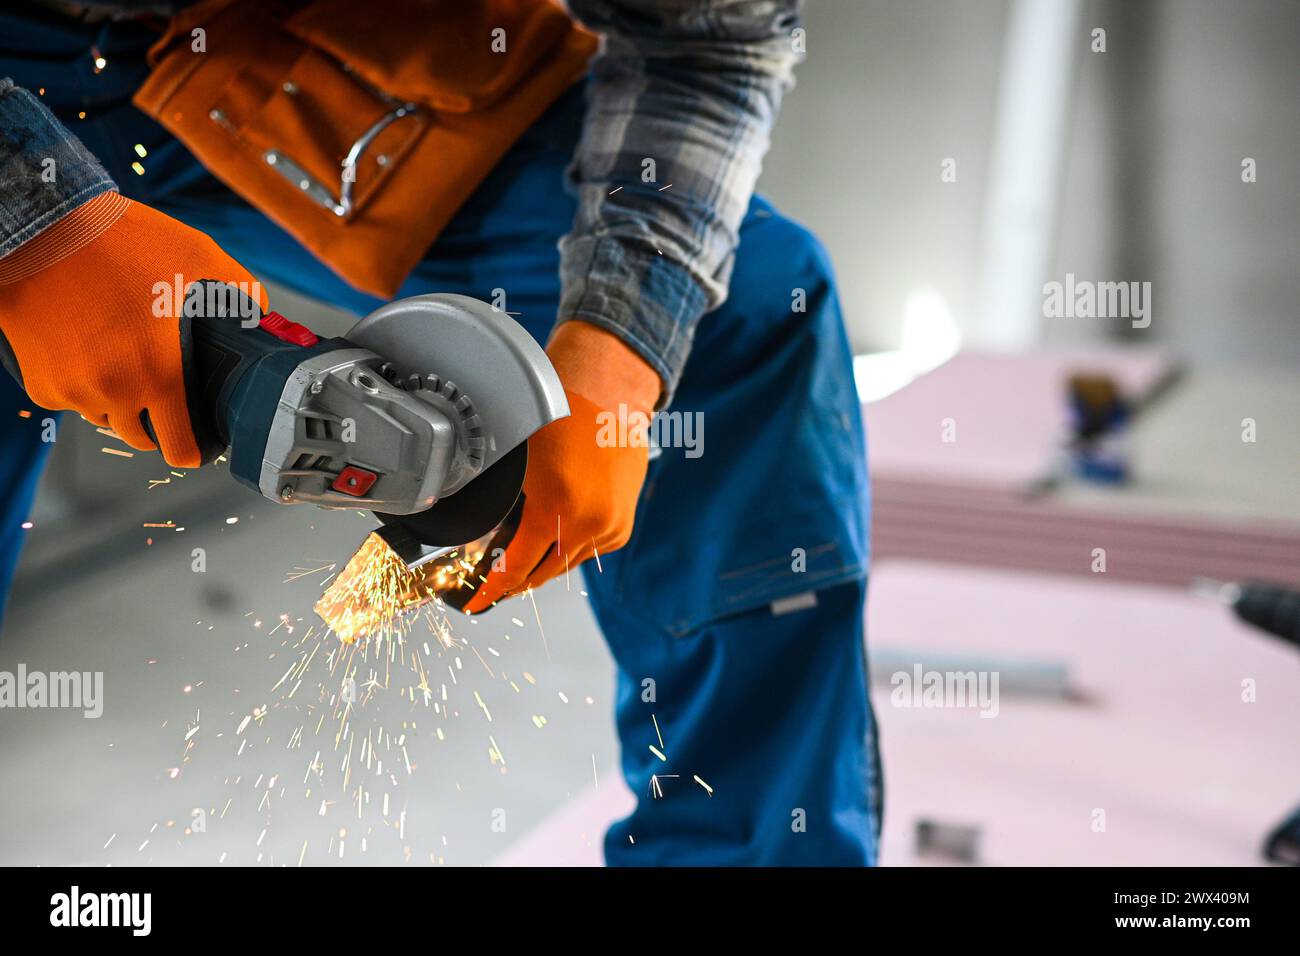 a worker saws a plasterboard profile using an angle grinder. Stock Photo